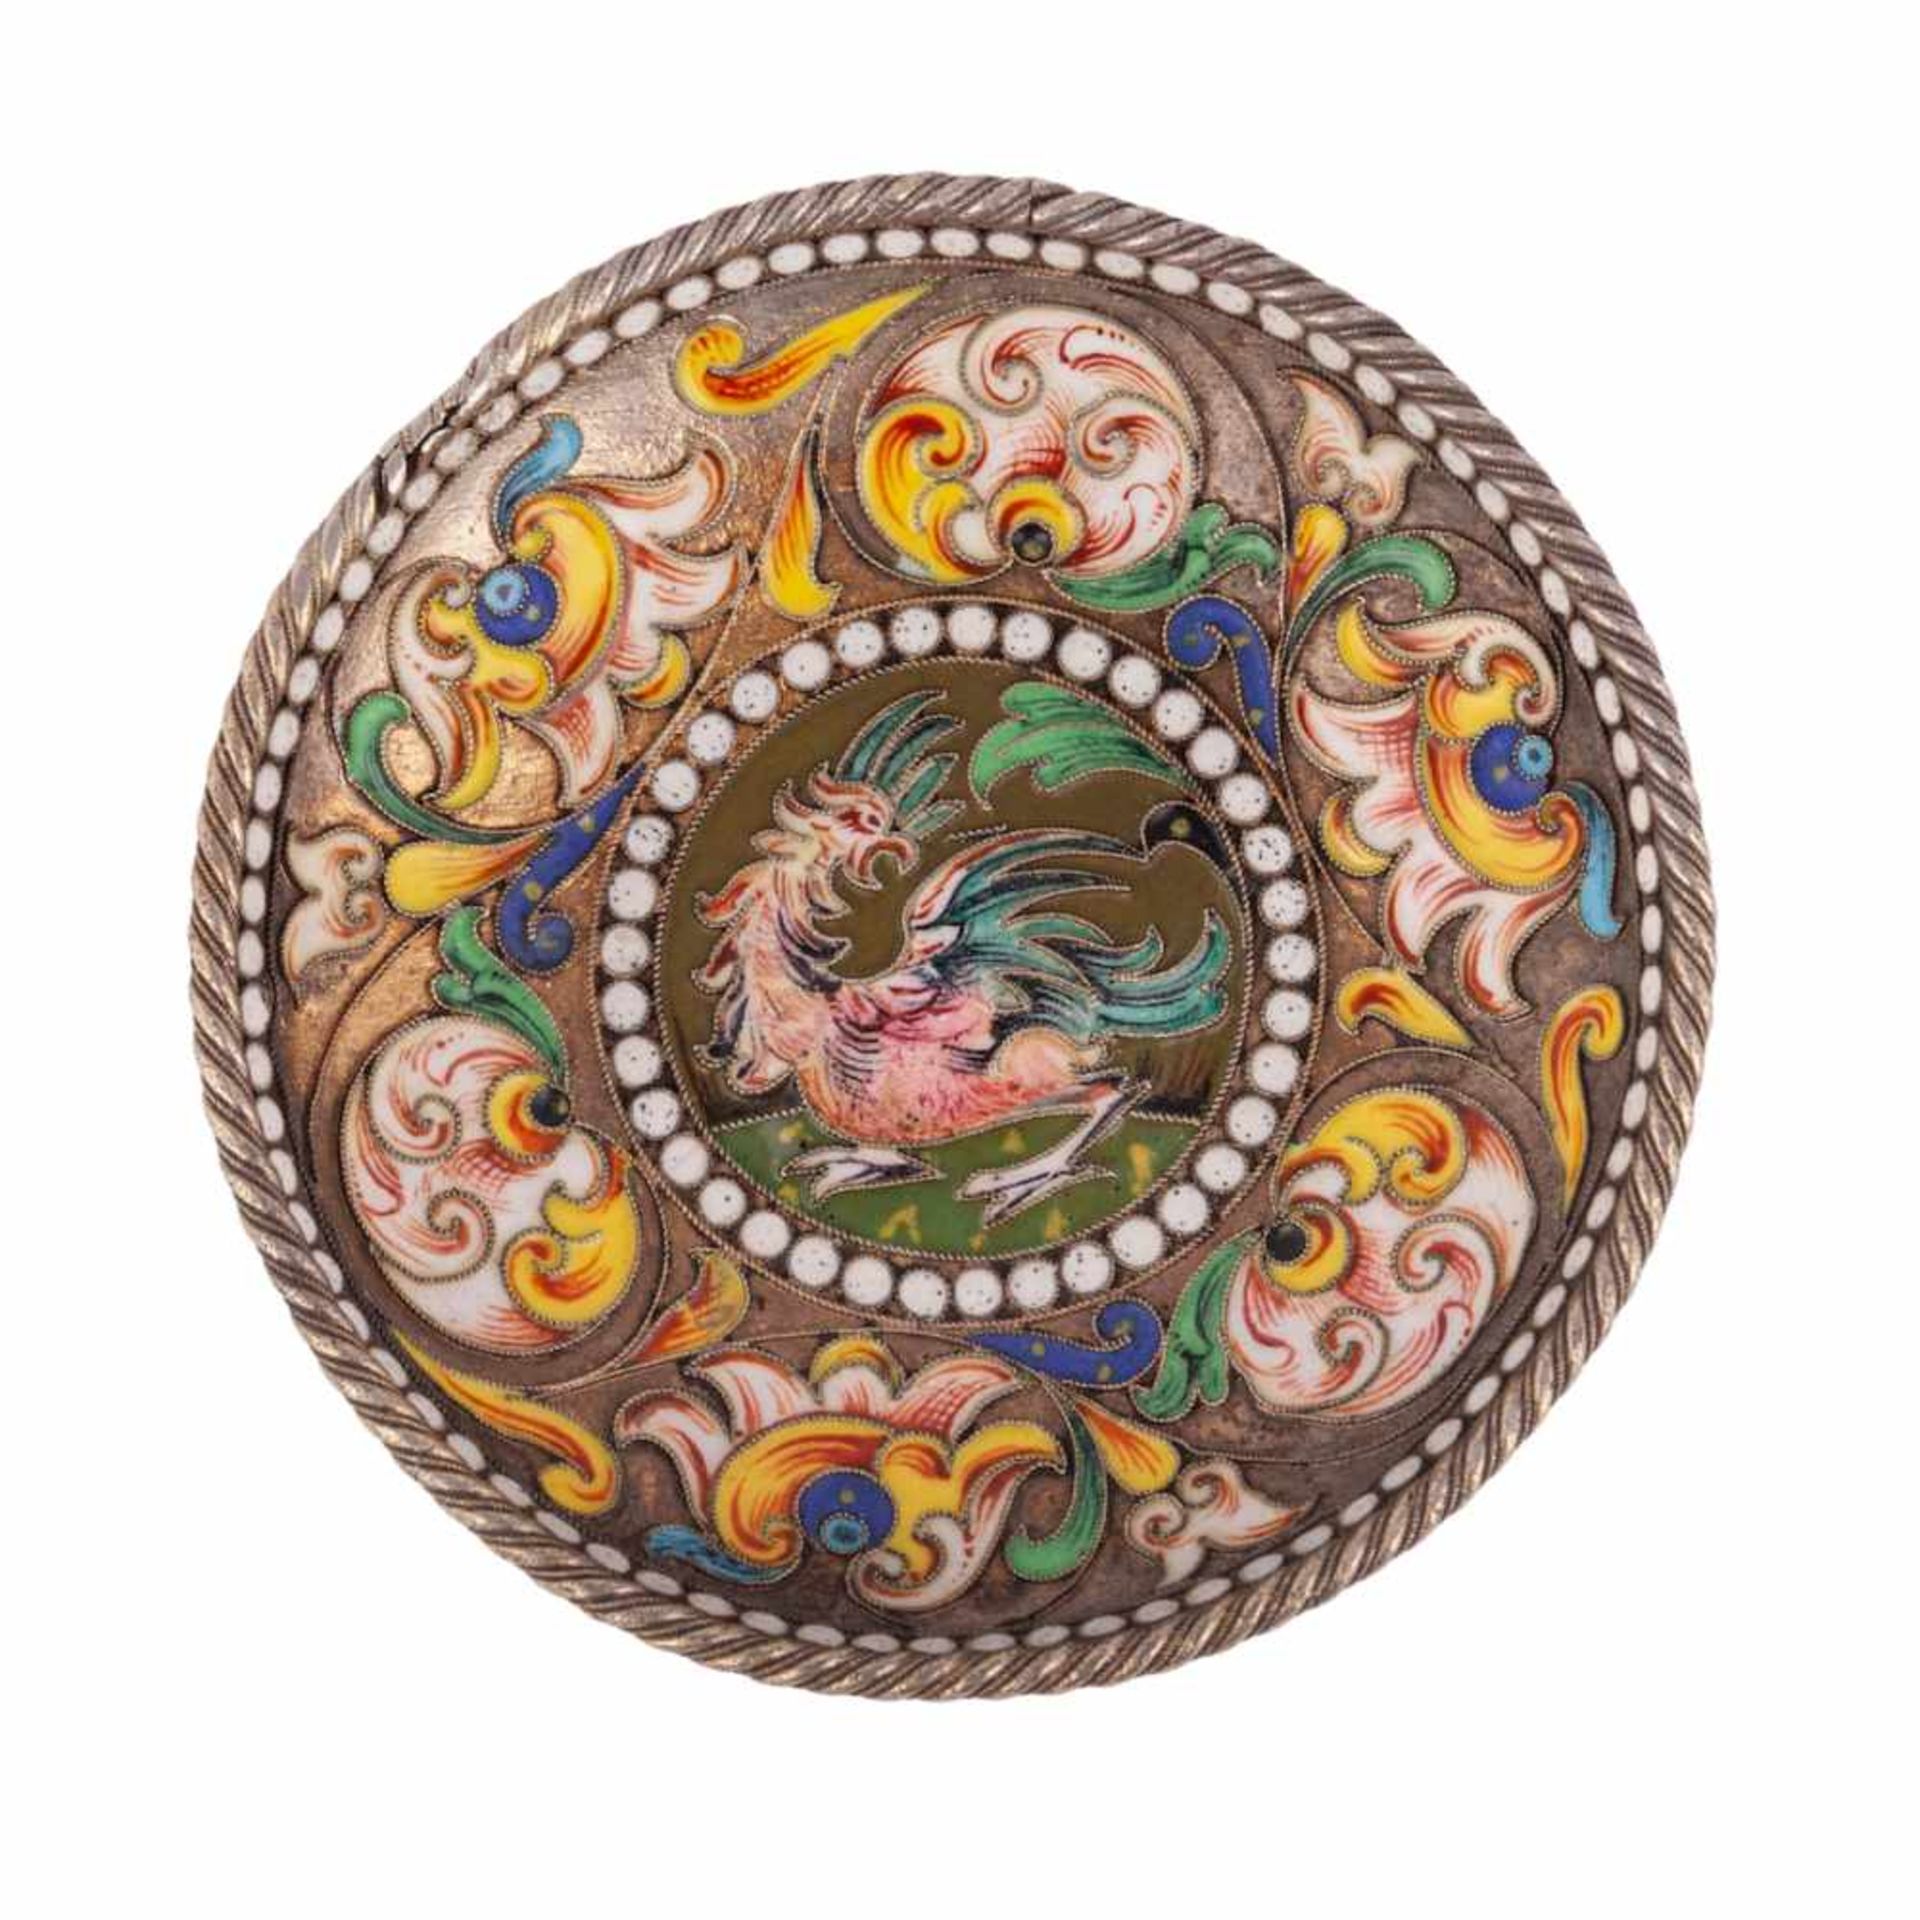 A Russian silver-gilt and painted enamel saucer - Image 2 of 5